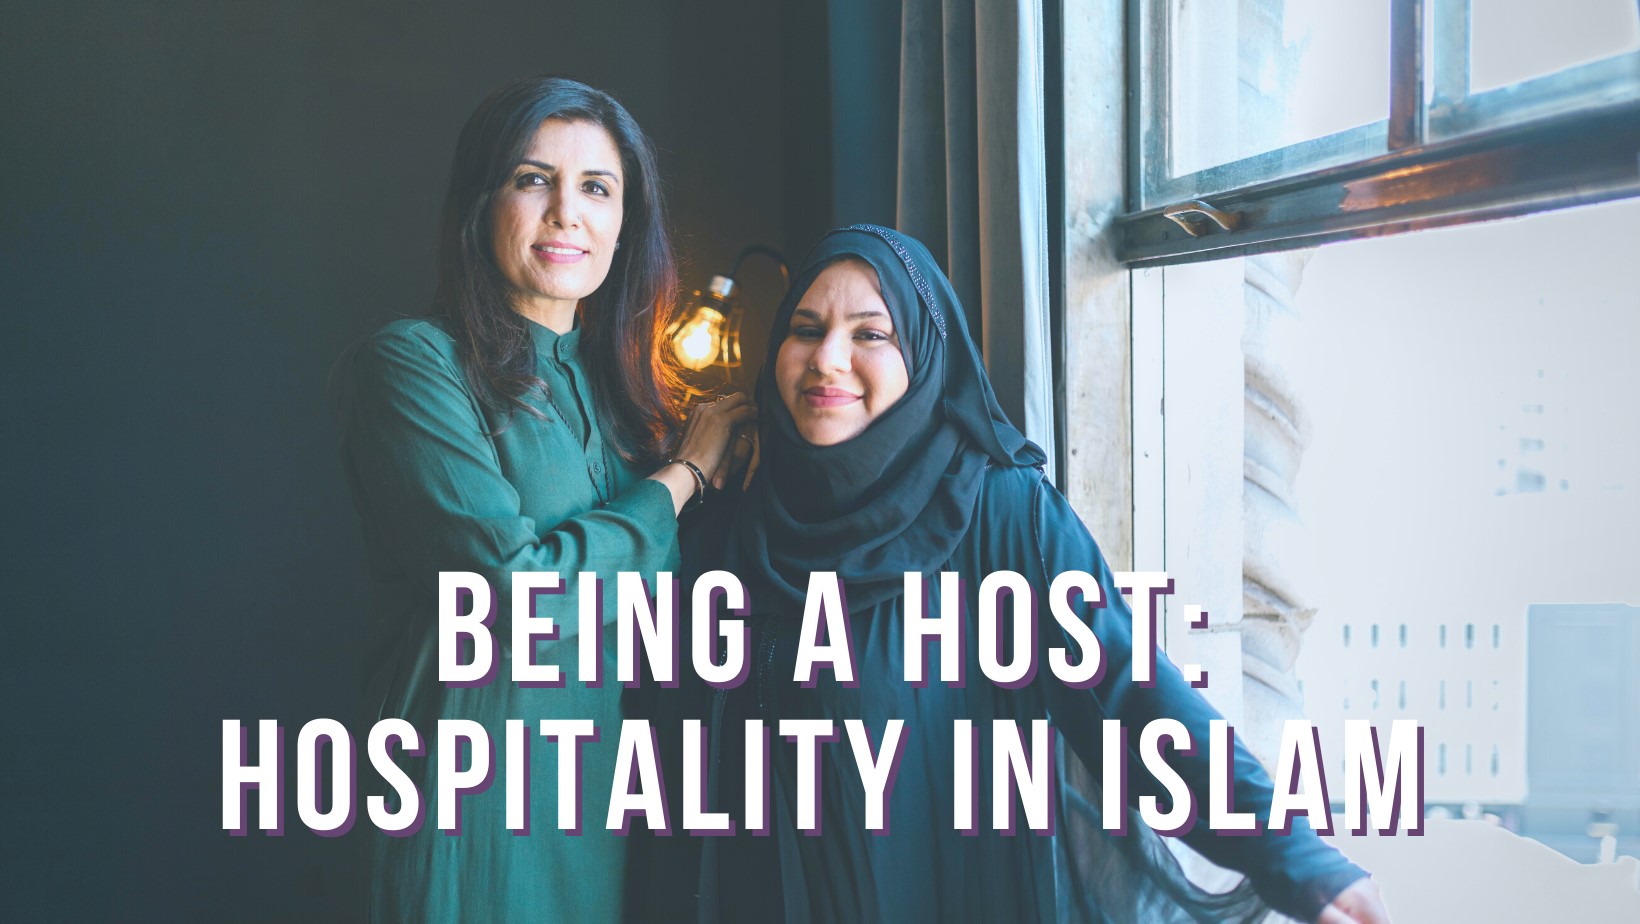 Being a host: Hospitality in Islam